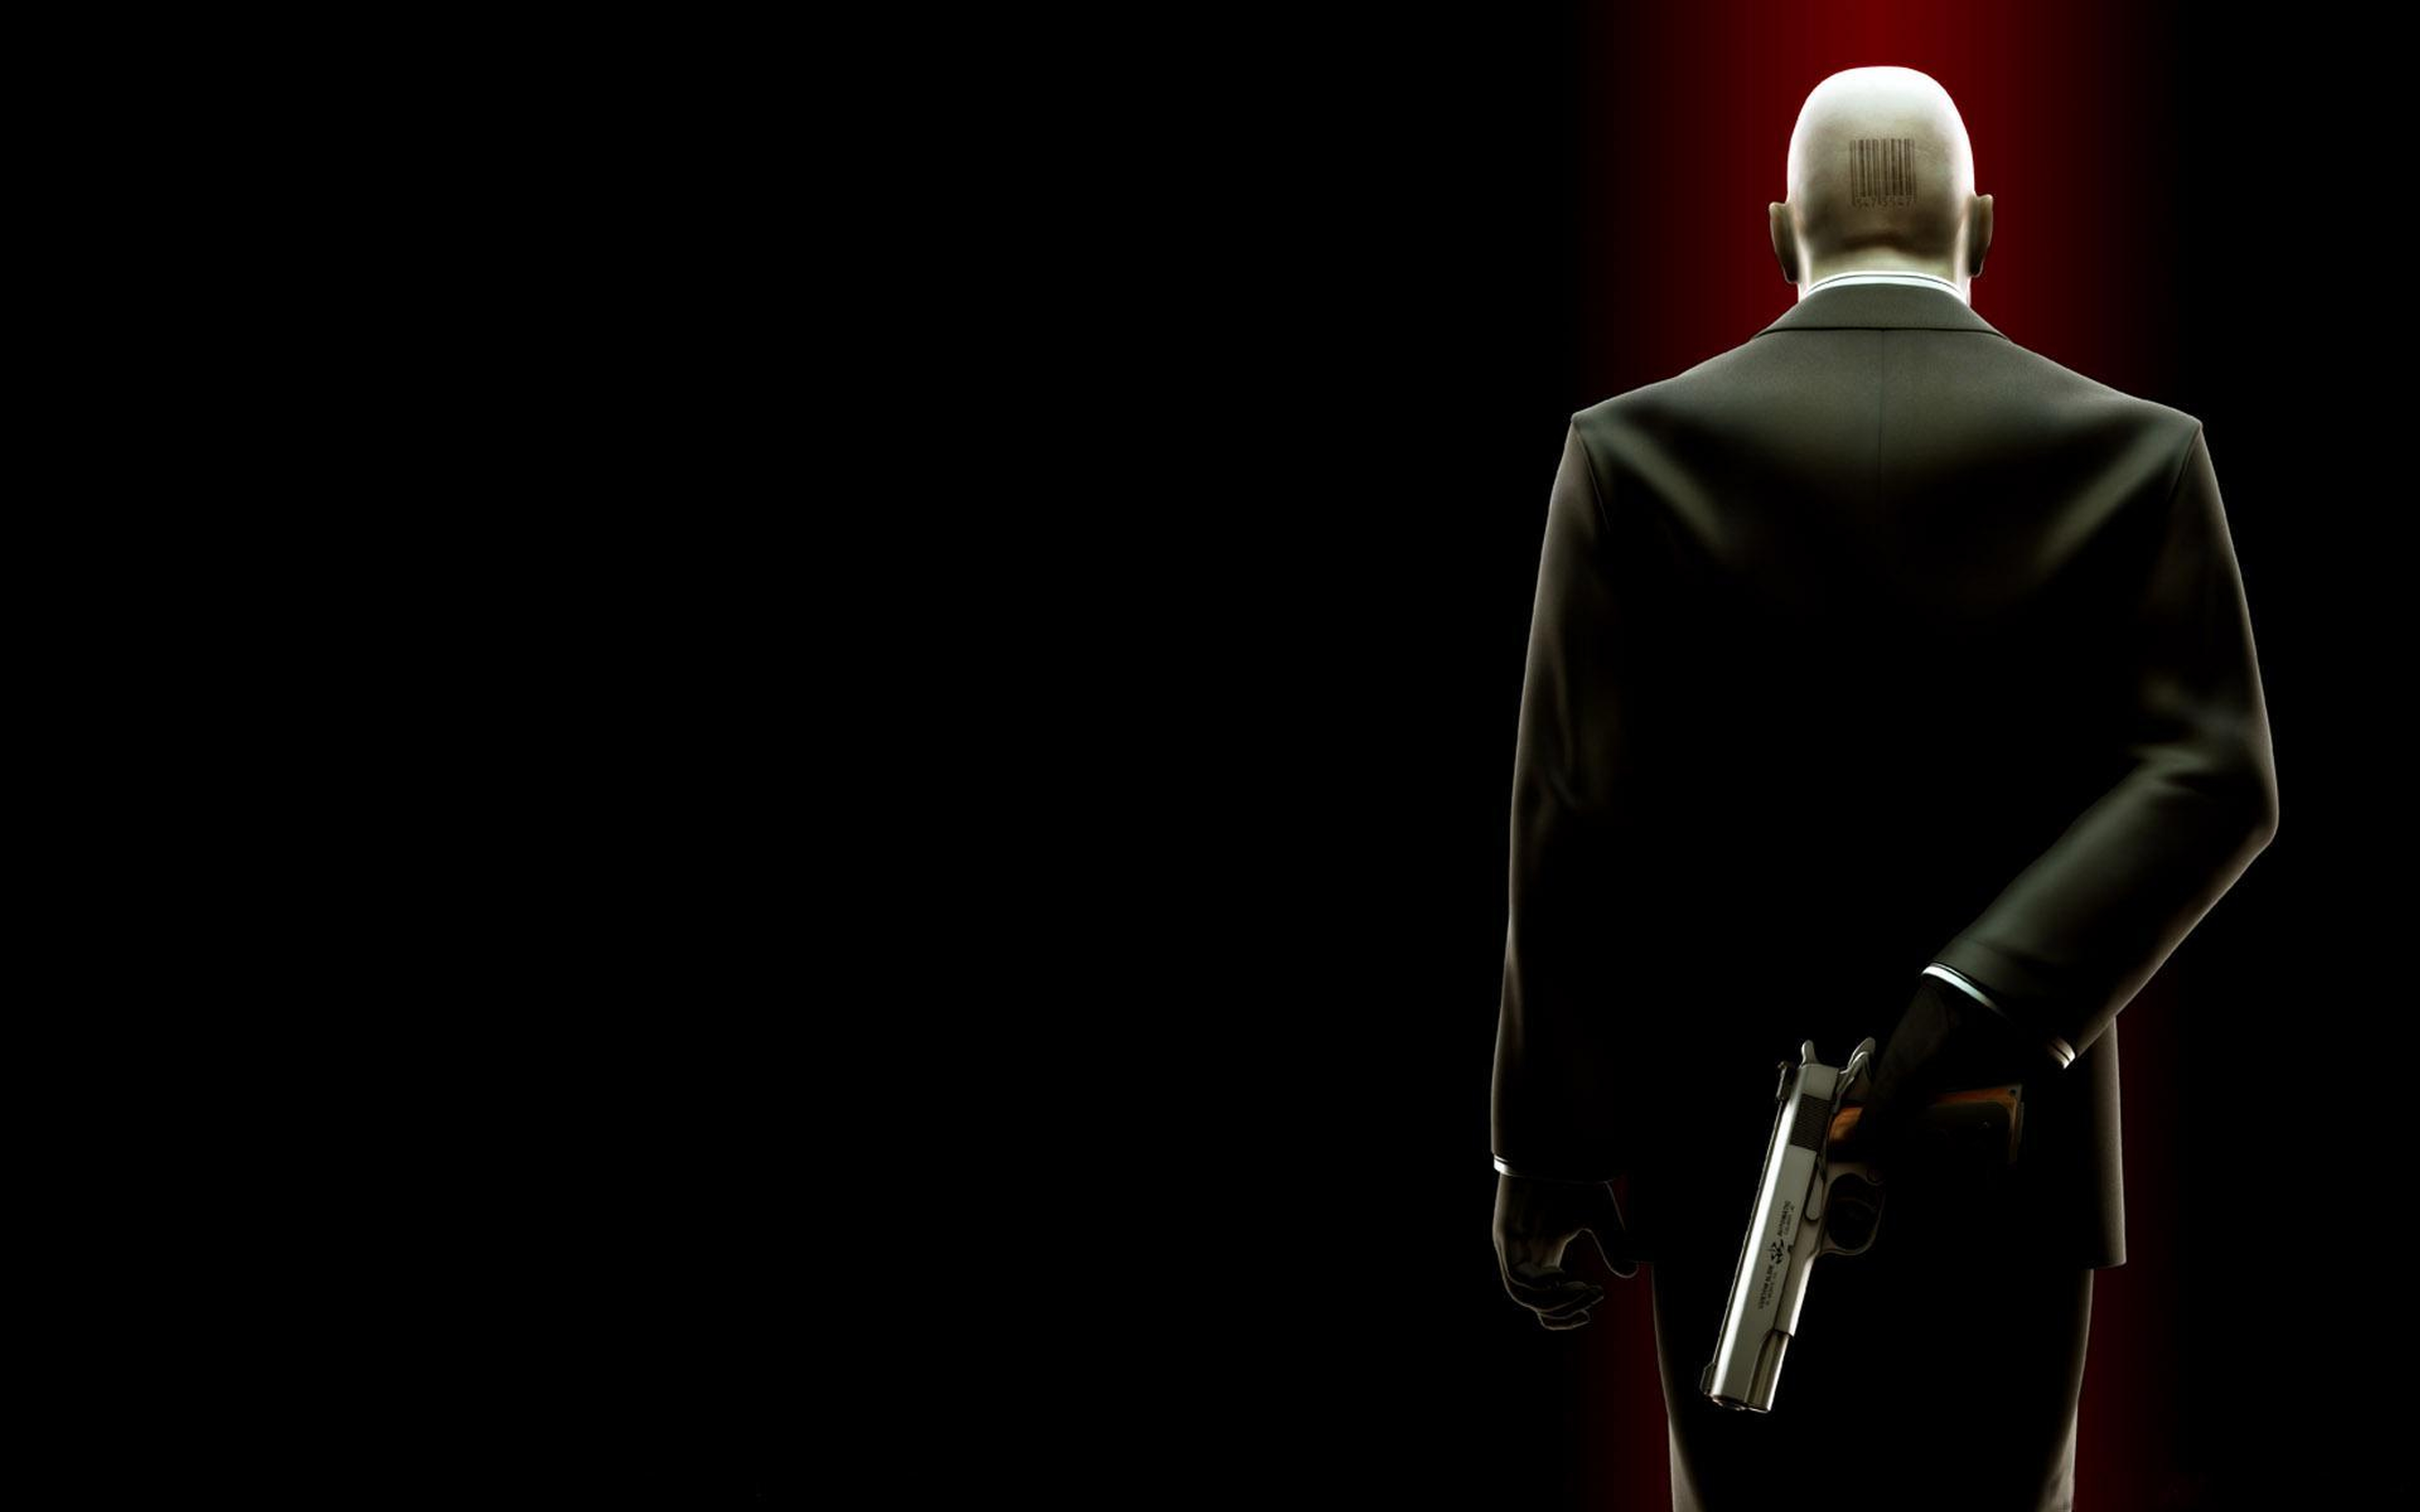 7680x4320 2016 Hitman Game 8k HD 4k Wallpapers, Image, Backgrounds